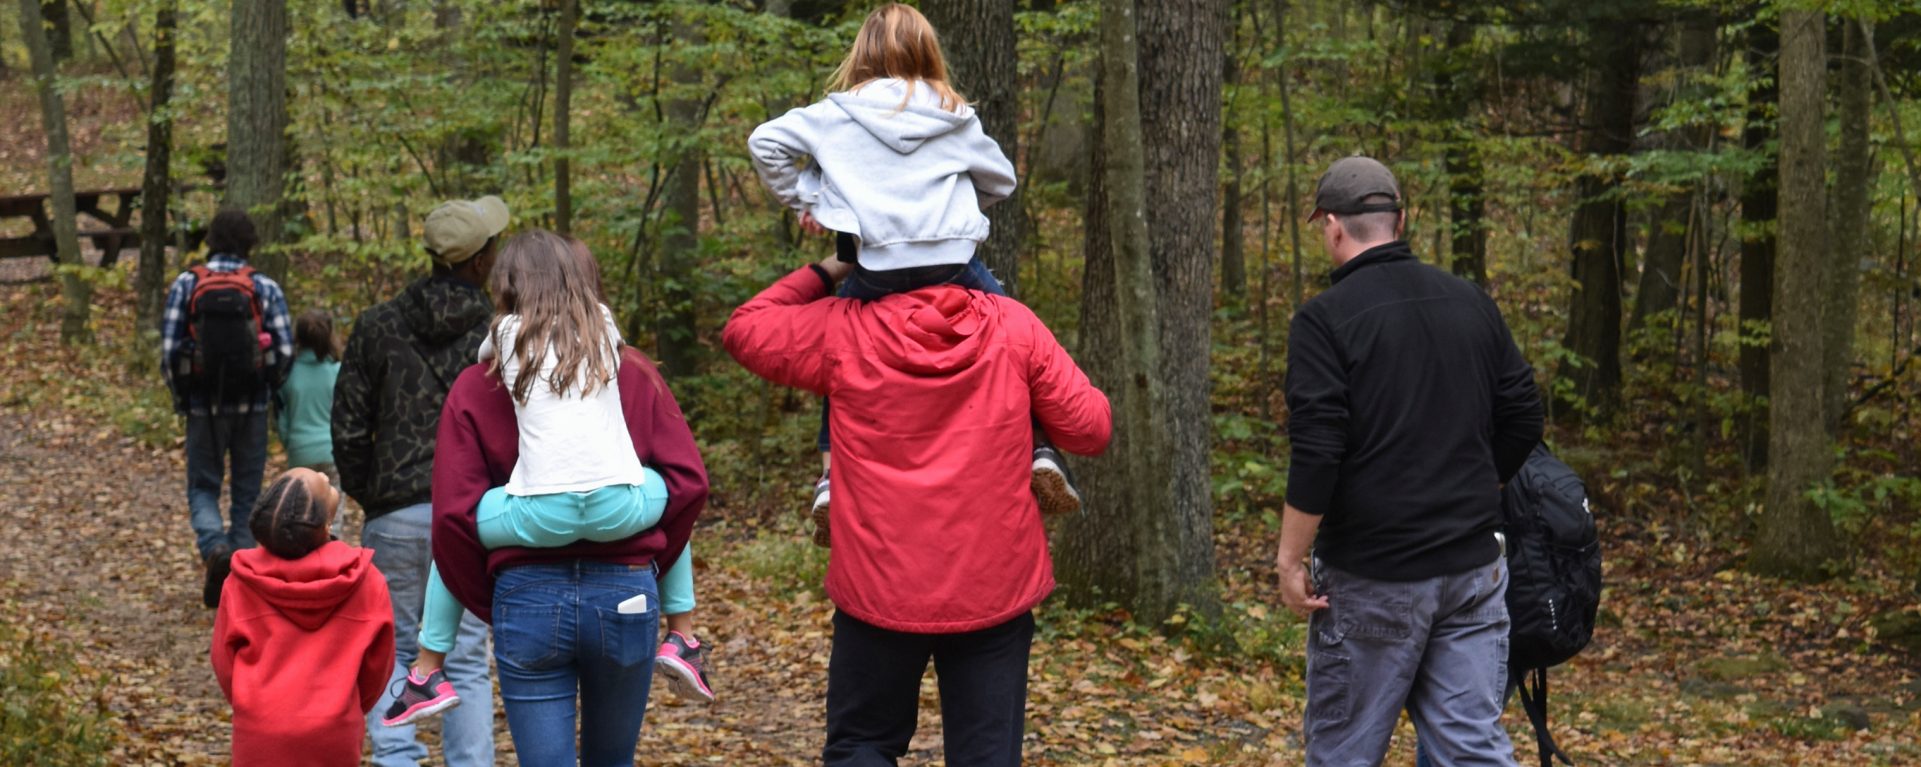  group of people walking in the woods, one young girl on her father's shoulders 